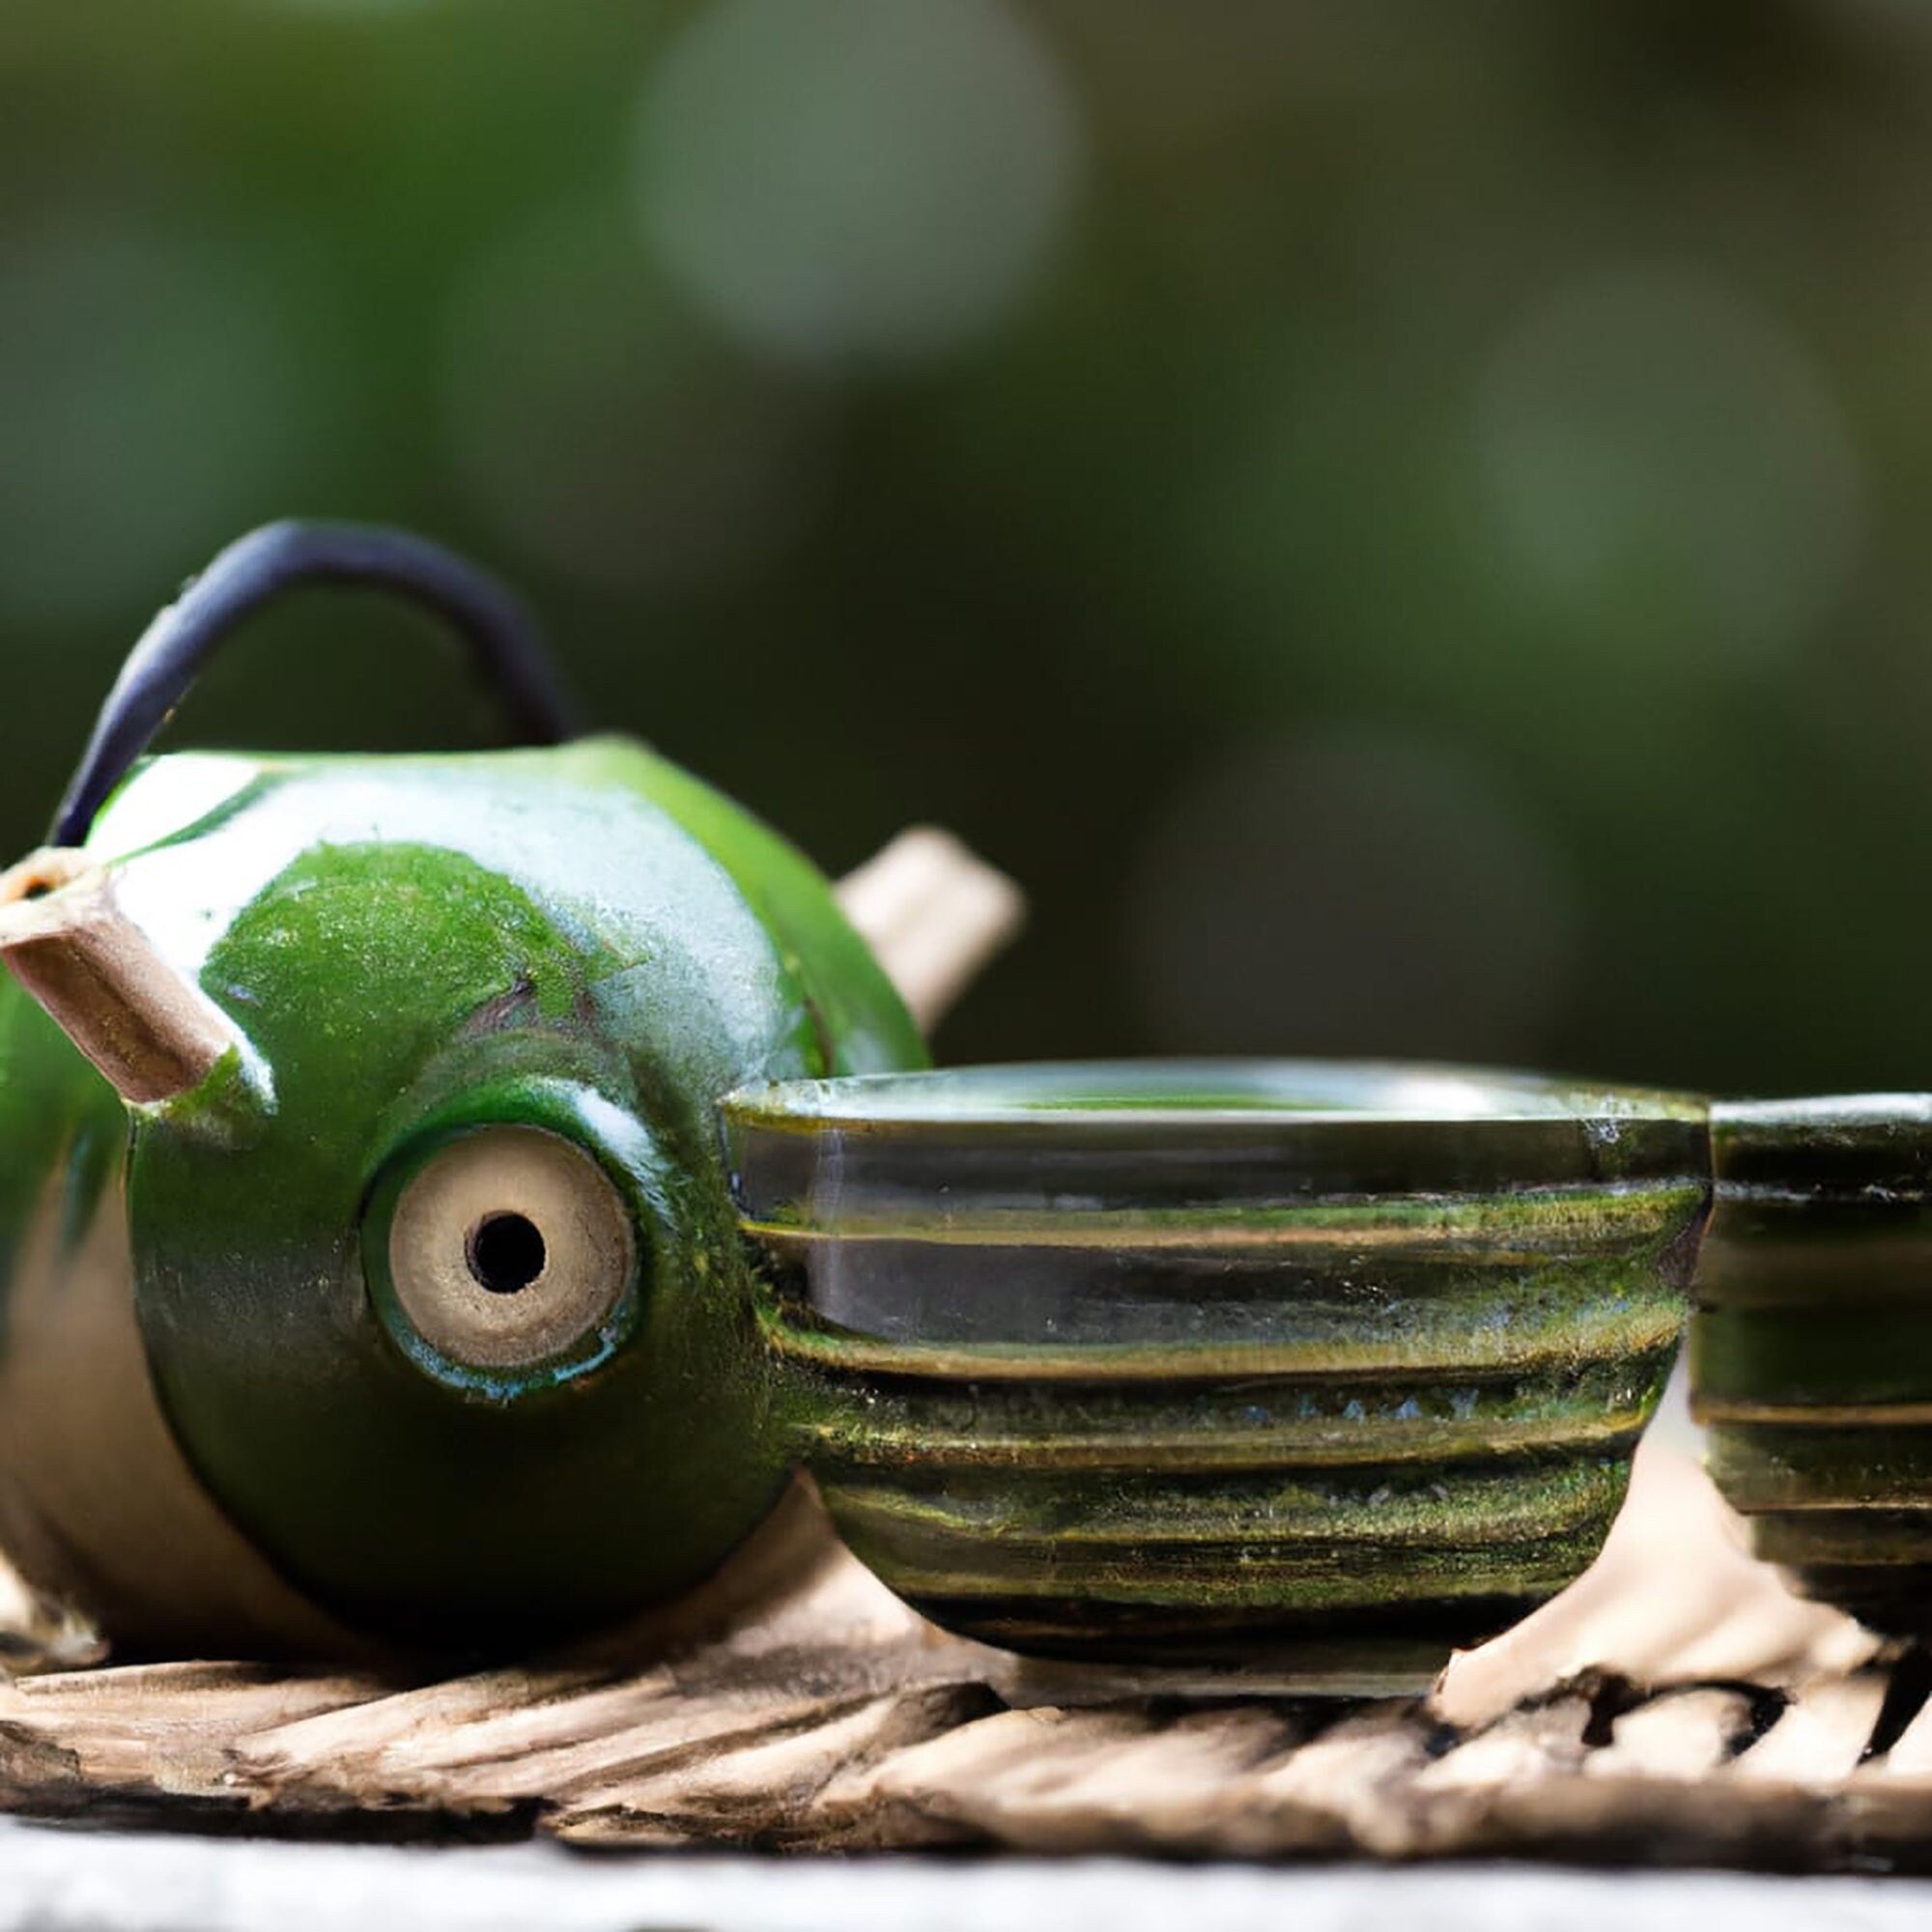 raditional Japanese green tea service with a green ceramic teapot and matching cups, ideal for brewing loose leaf green tea.